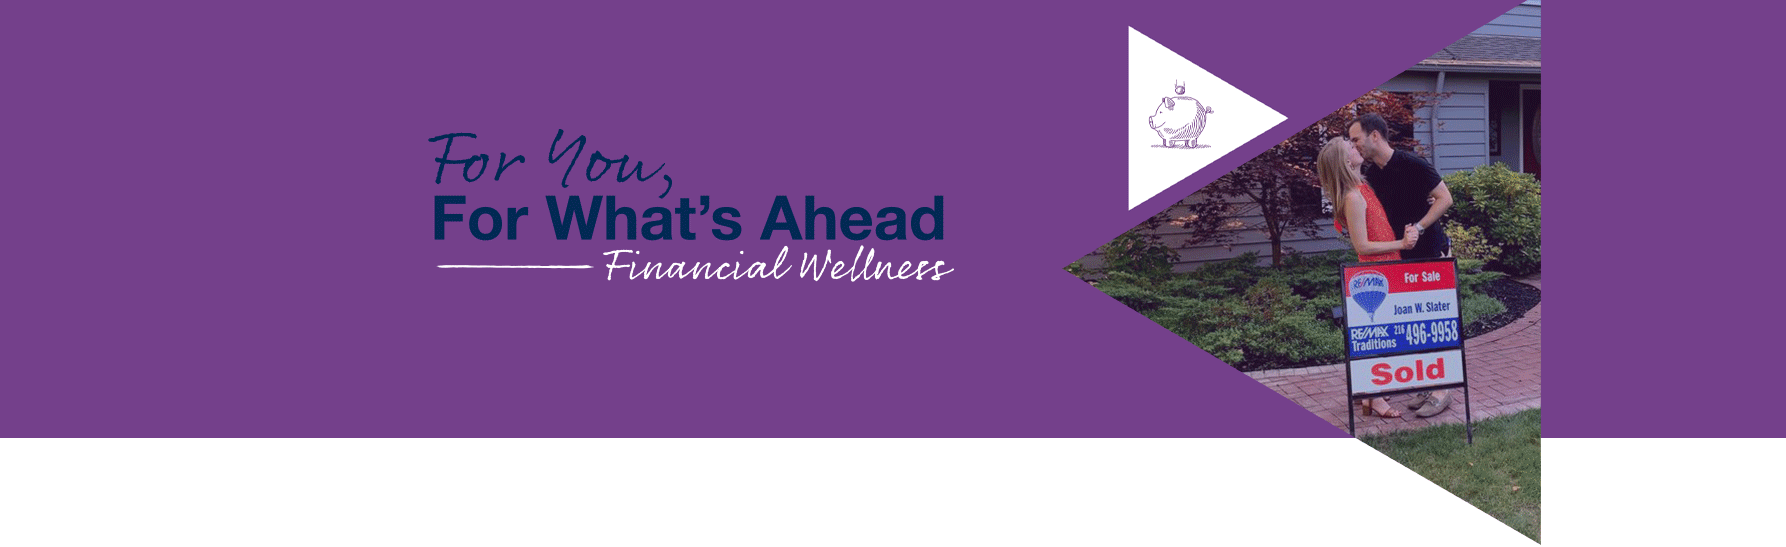 For You, For What's Ahead: Financial Wellness